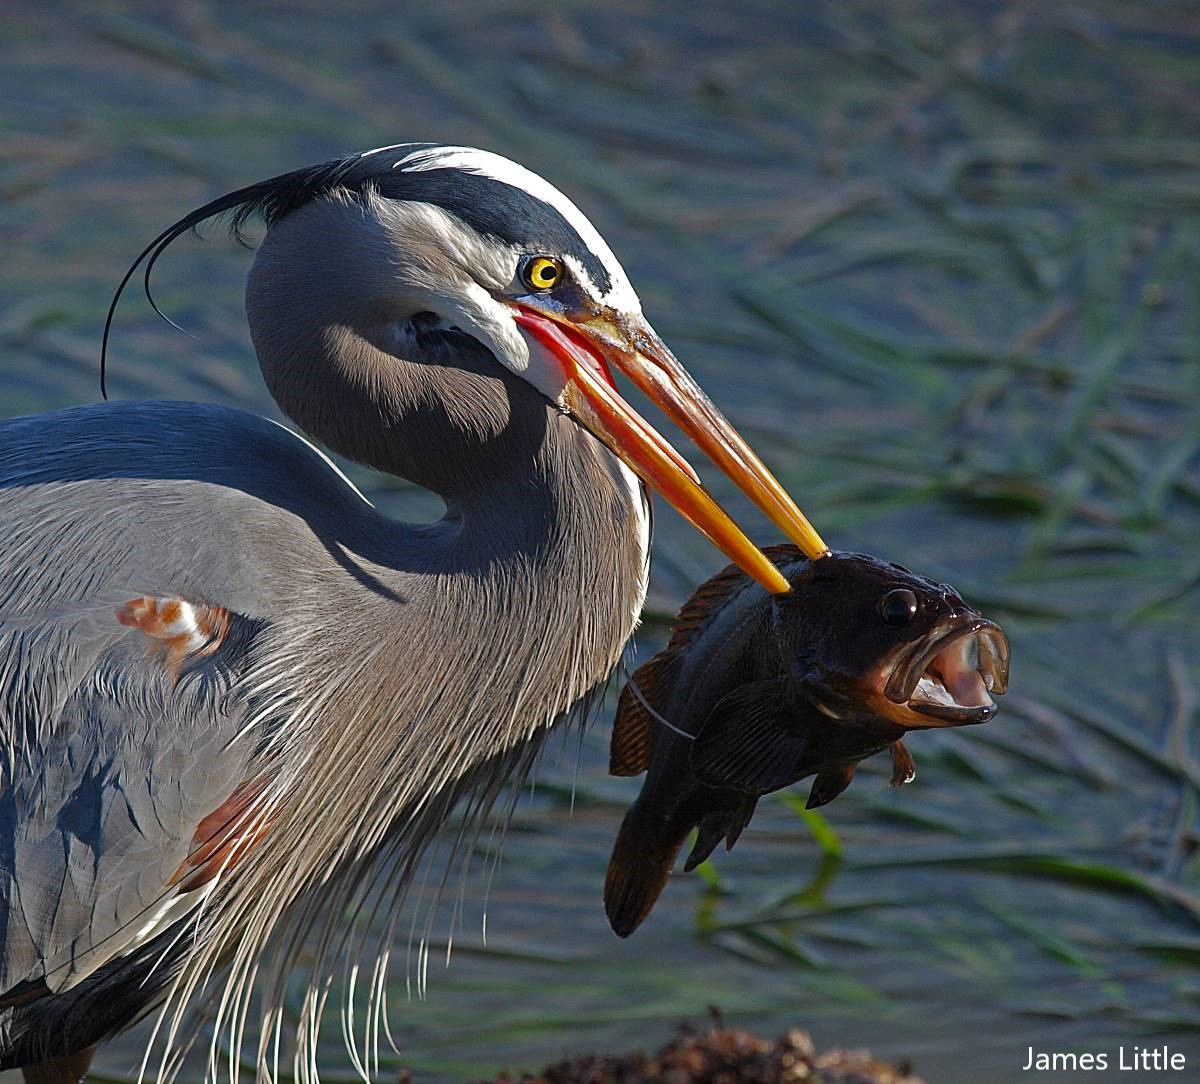 a heron has speared a fish with it's beak